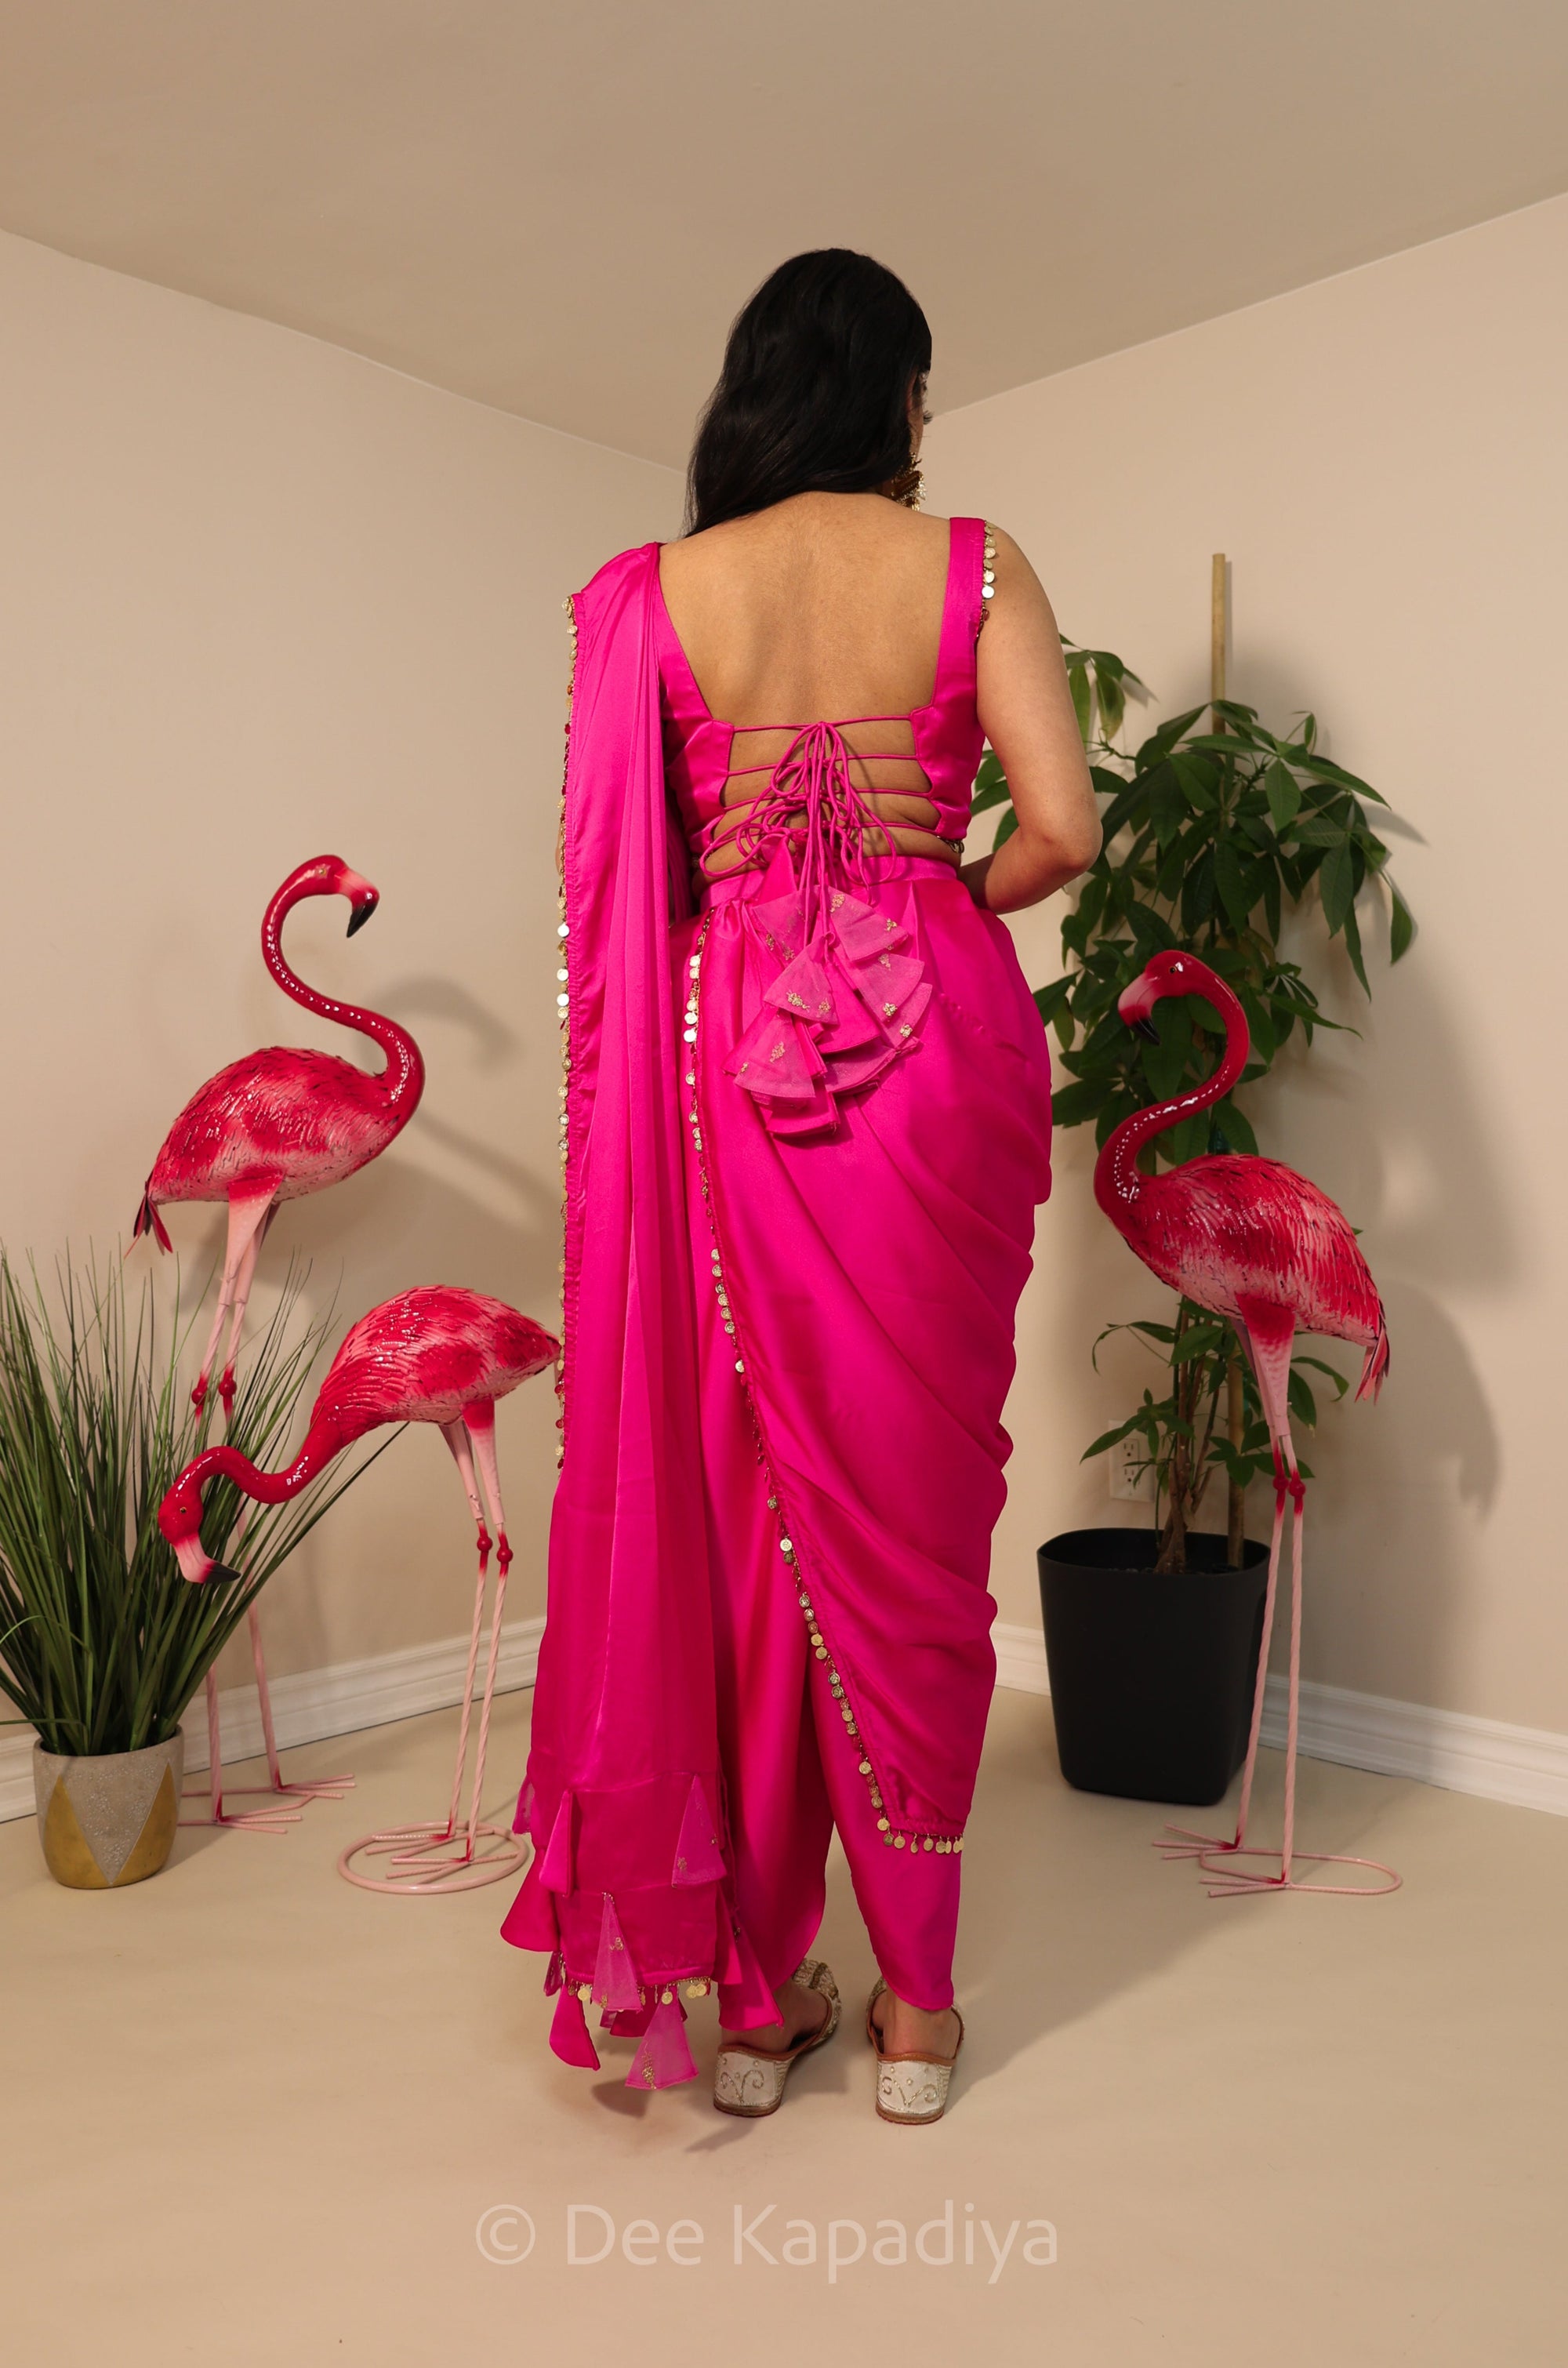 Geet from Jabwemet giving you all the hot pink vibes in this gorgeous silky dhoti saree with corset for mehendi or fiesta event